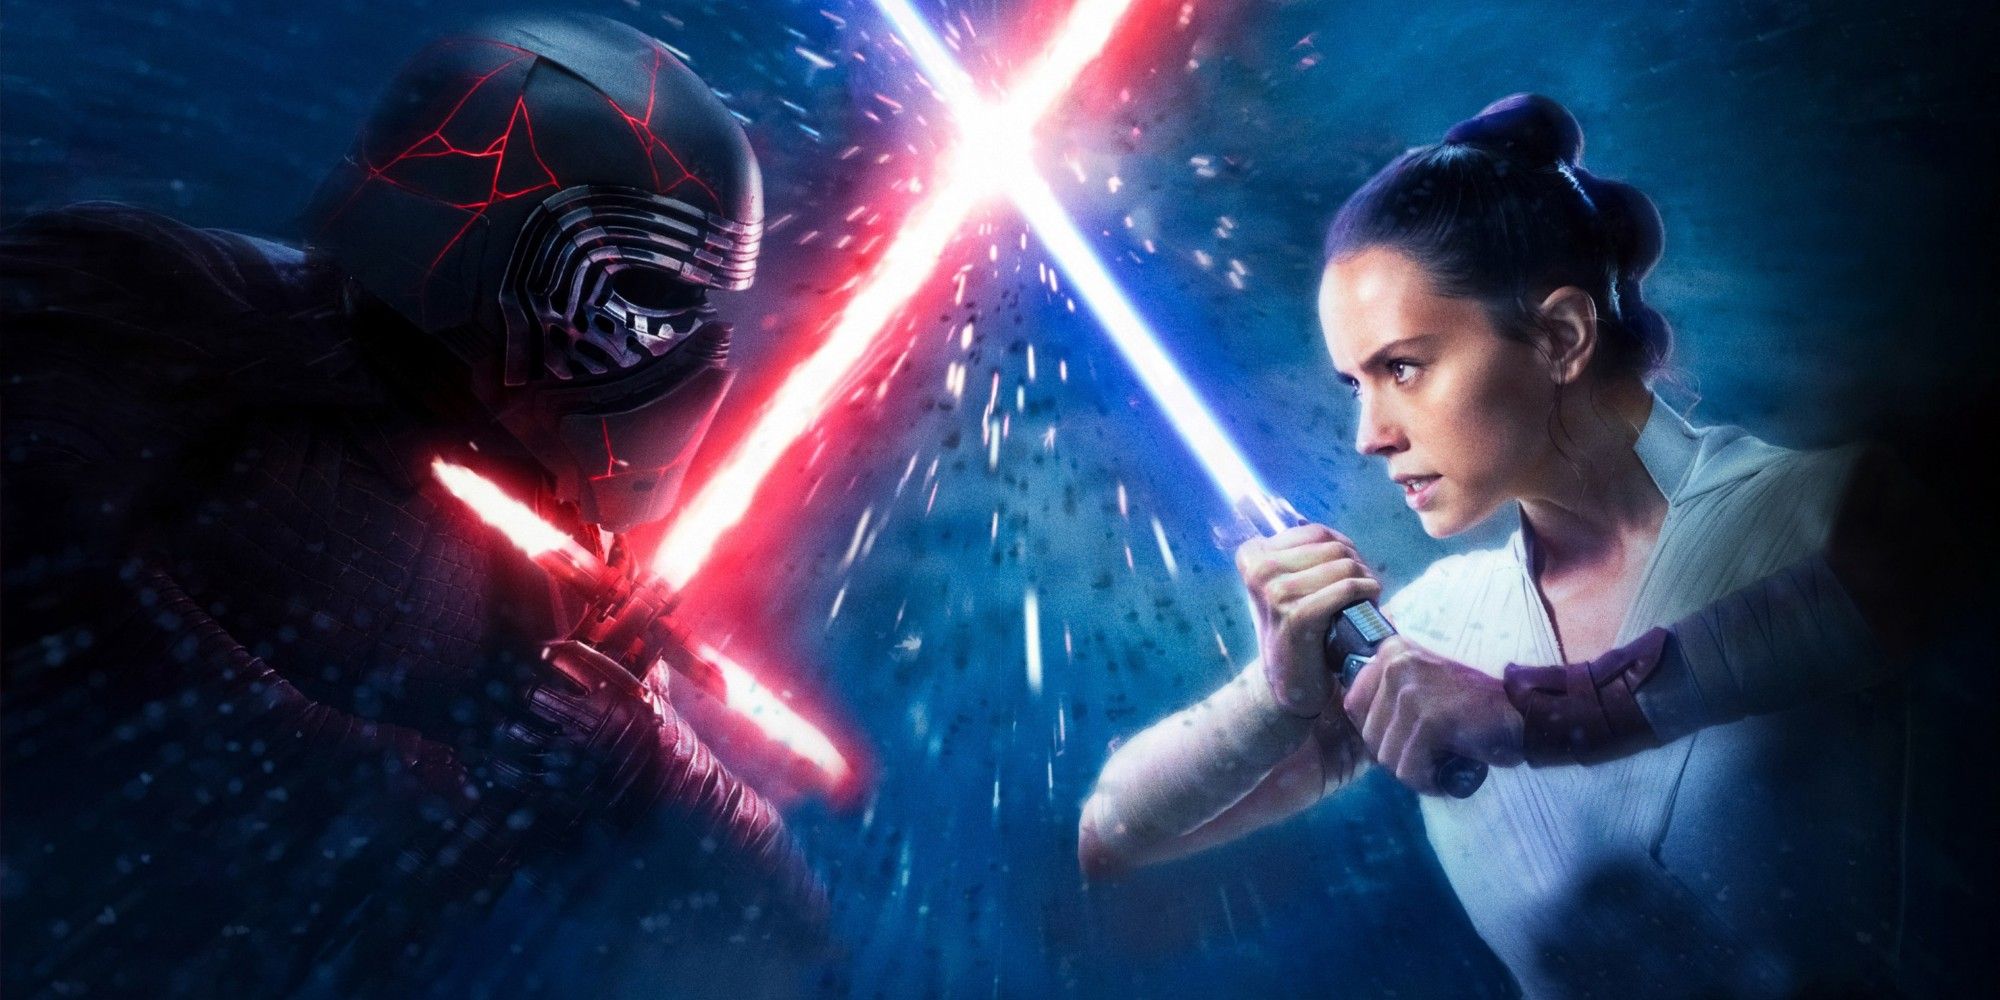 Star Wars The Rise of Skywalkr Kylo Ren and Rey